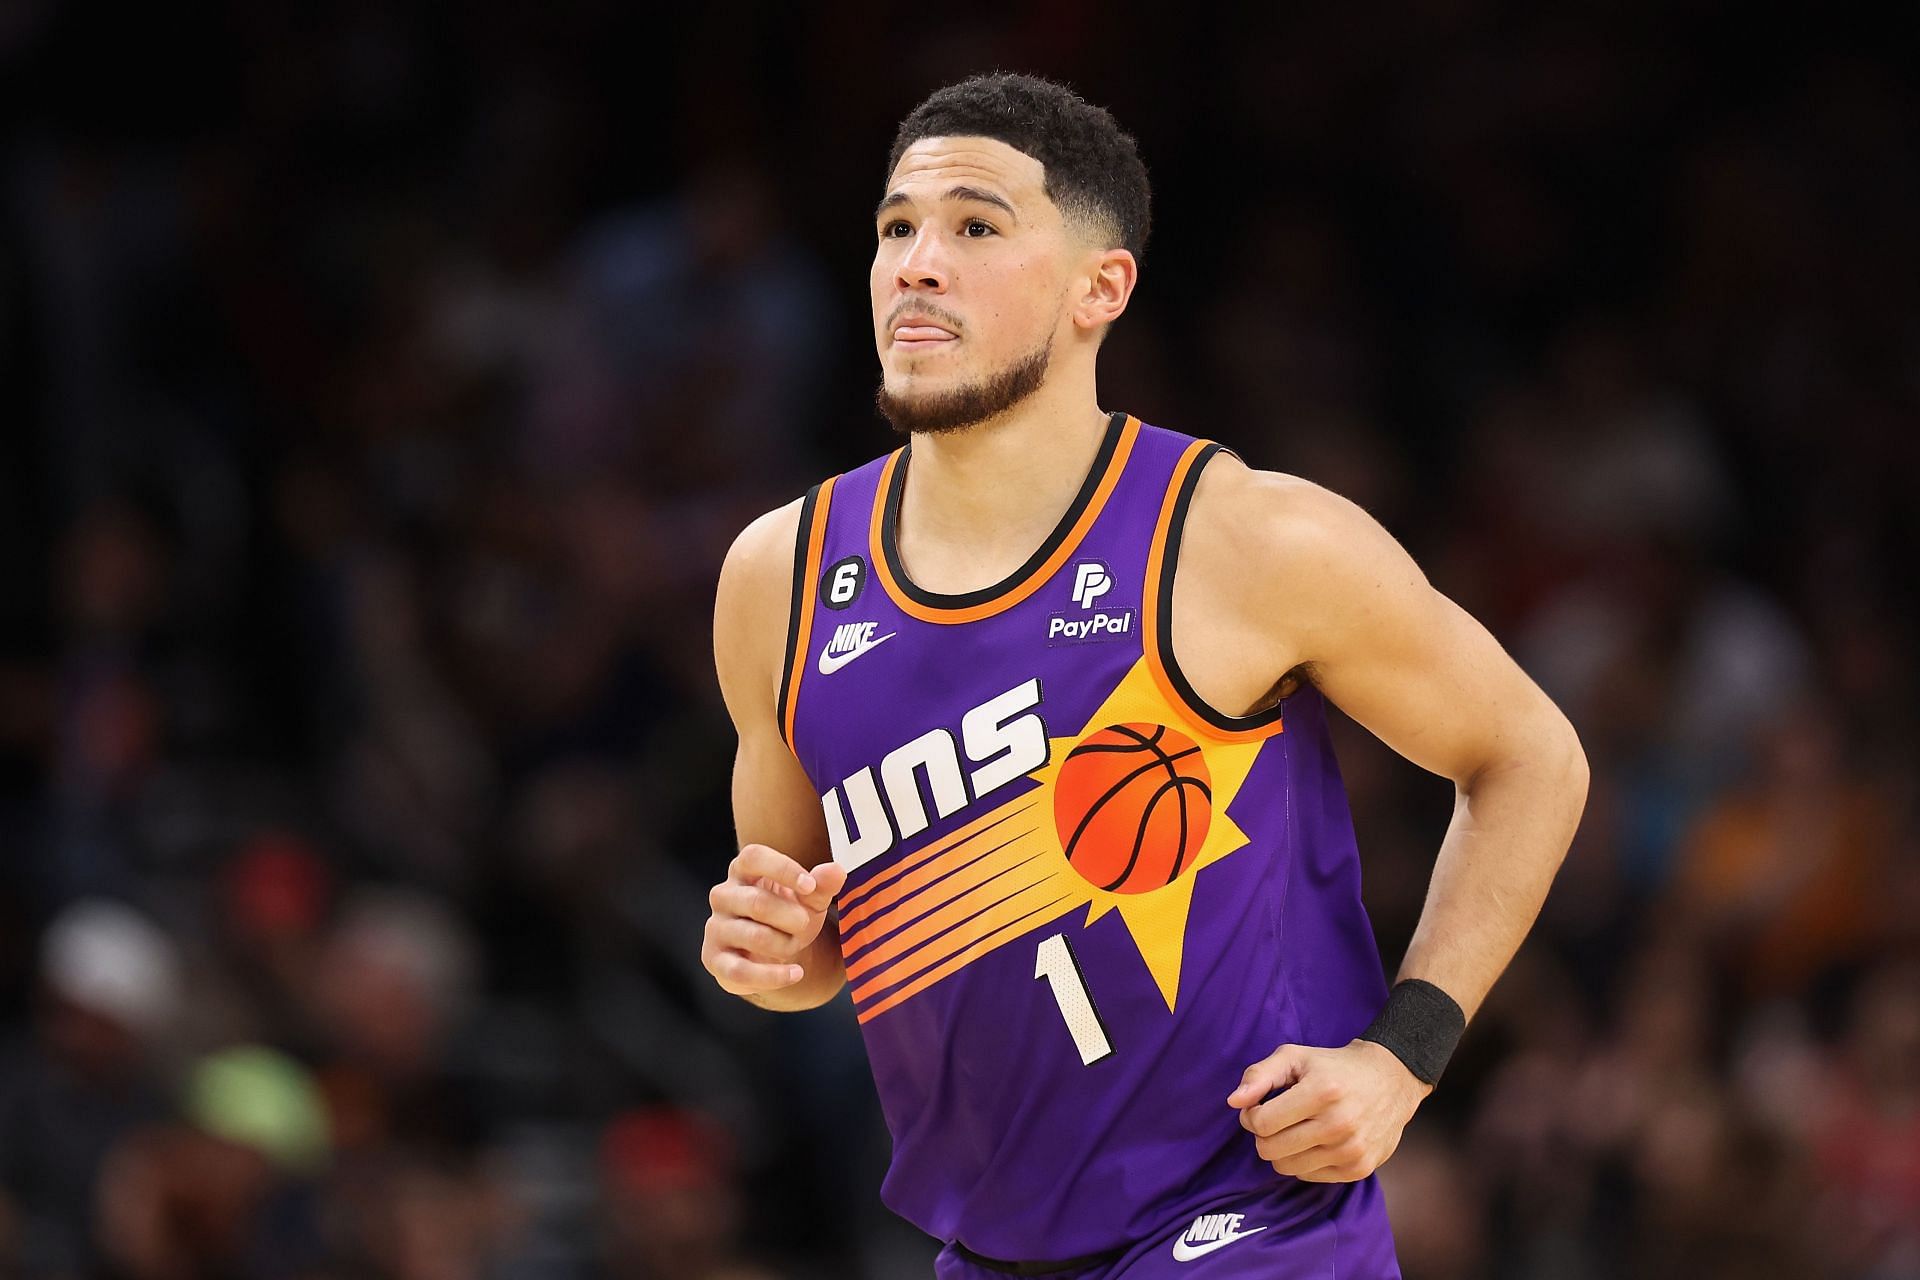 Devin Booker will miss another game due to left hamstring tightness.